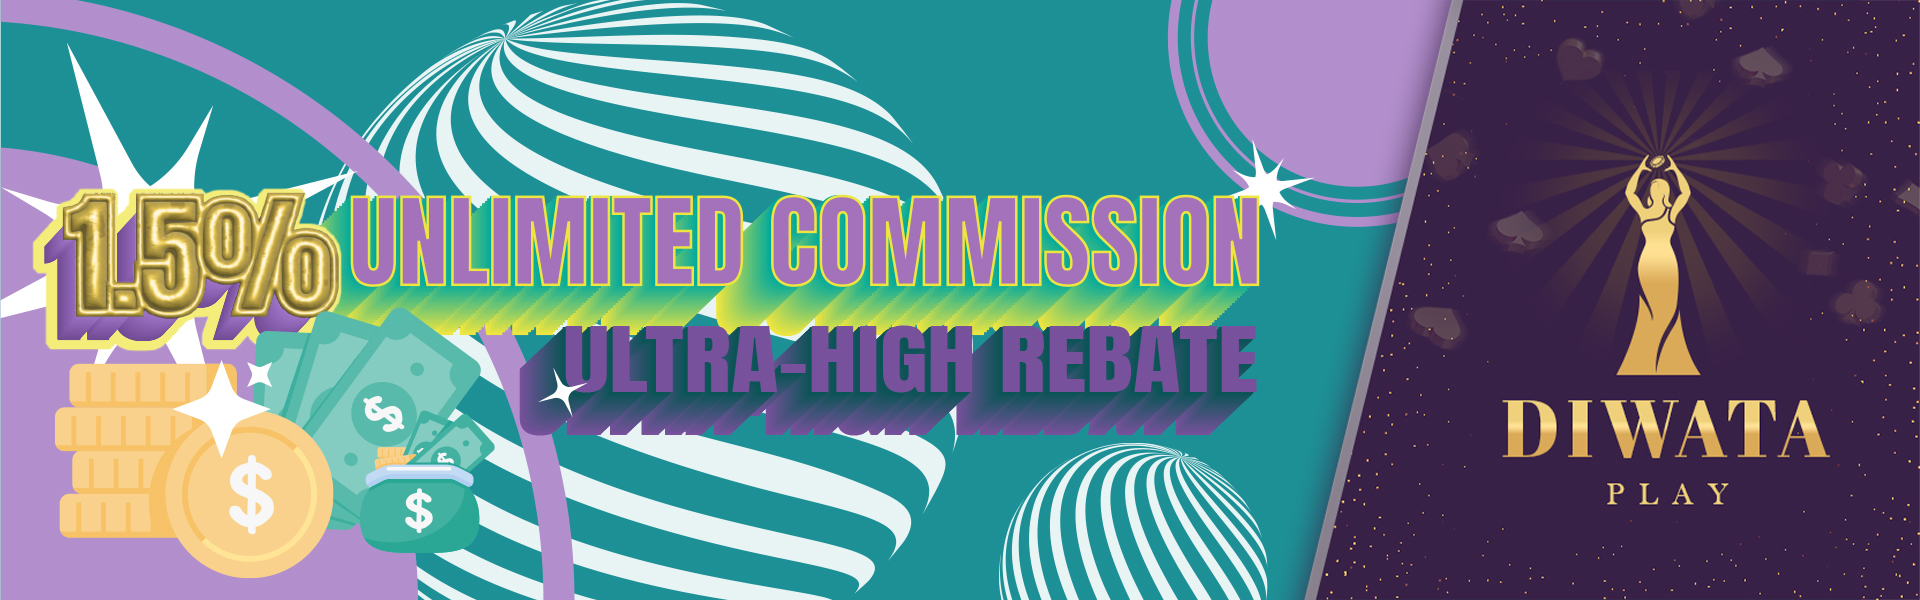 Unlimited Commission Banner